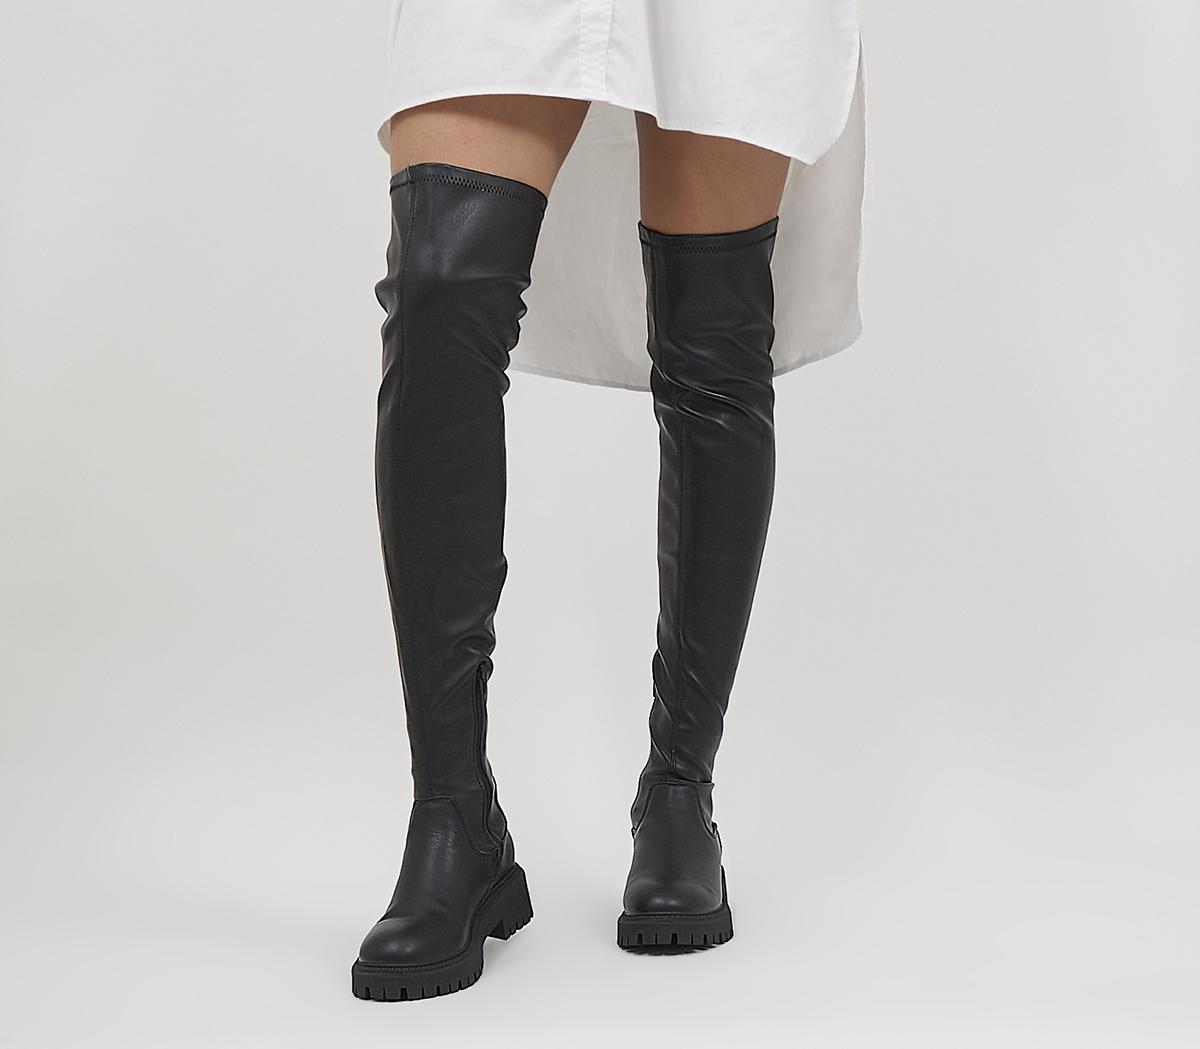 Kumasi Chunky Over The Knee Boots
Black Office